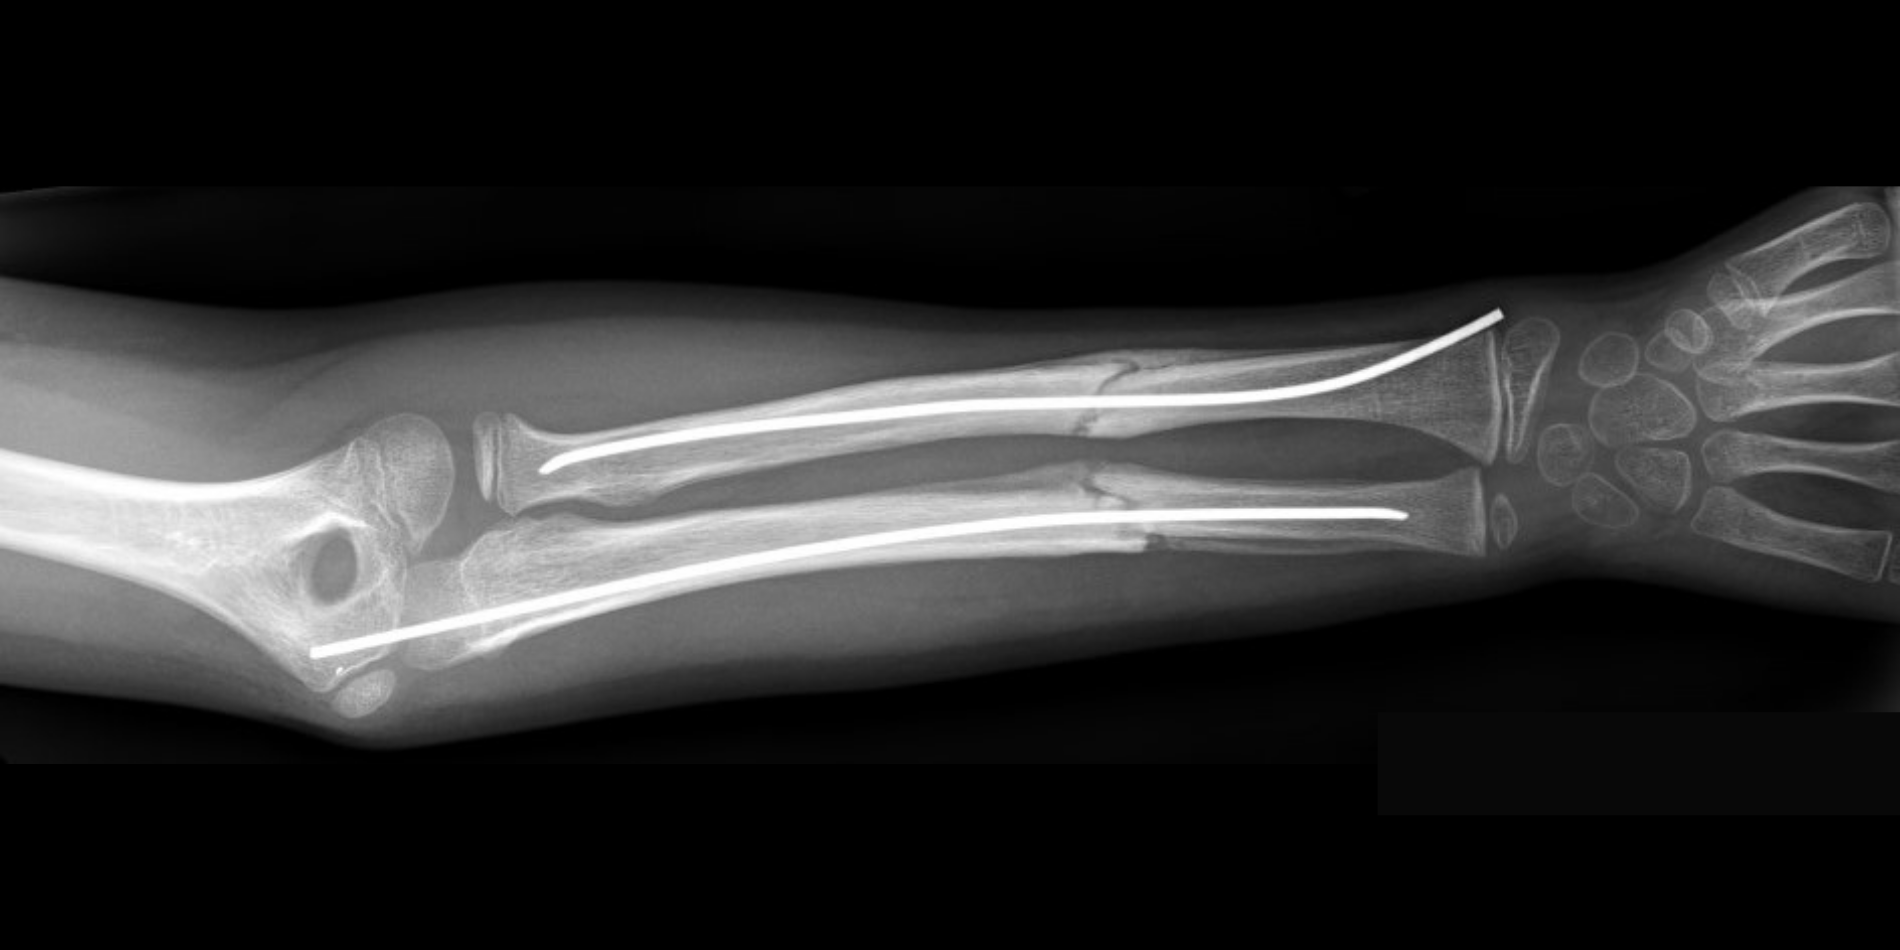 The x-ray of an arm repaired by an orthopaedic surgeon. A rod can be seen within the bone.